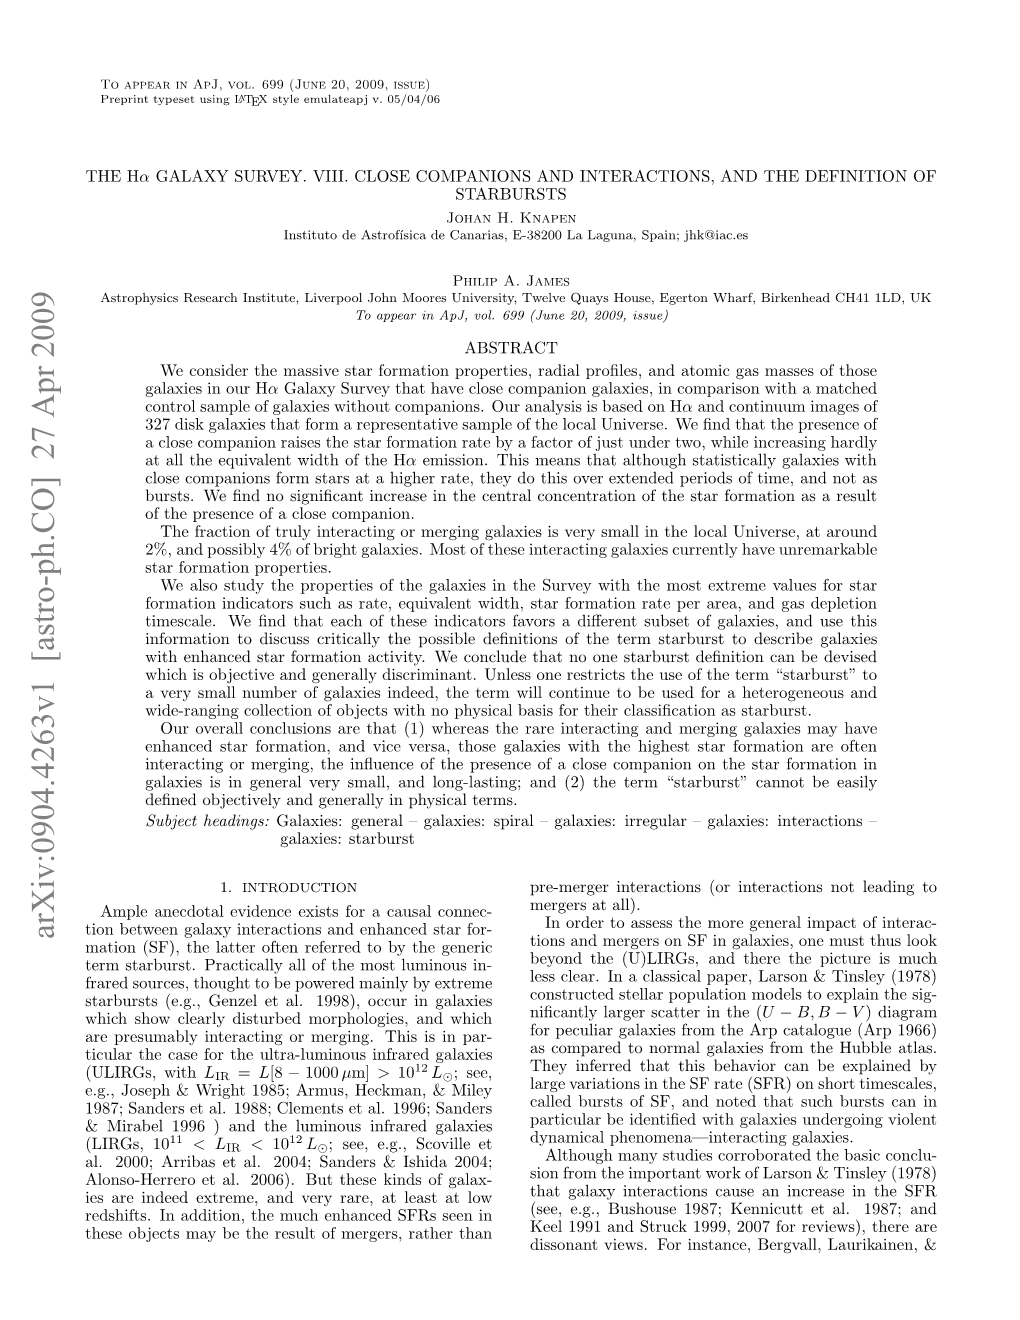 Arxiv:0904.4263V1 [Astro-Ph.CO] 27 Apr 2009 Iua H Aefrteutalmnu Nrrdgalaxies Par- Infrared in Ultra-Luminous Is the with This for (Ulirgs, Case Galaxies Merging